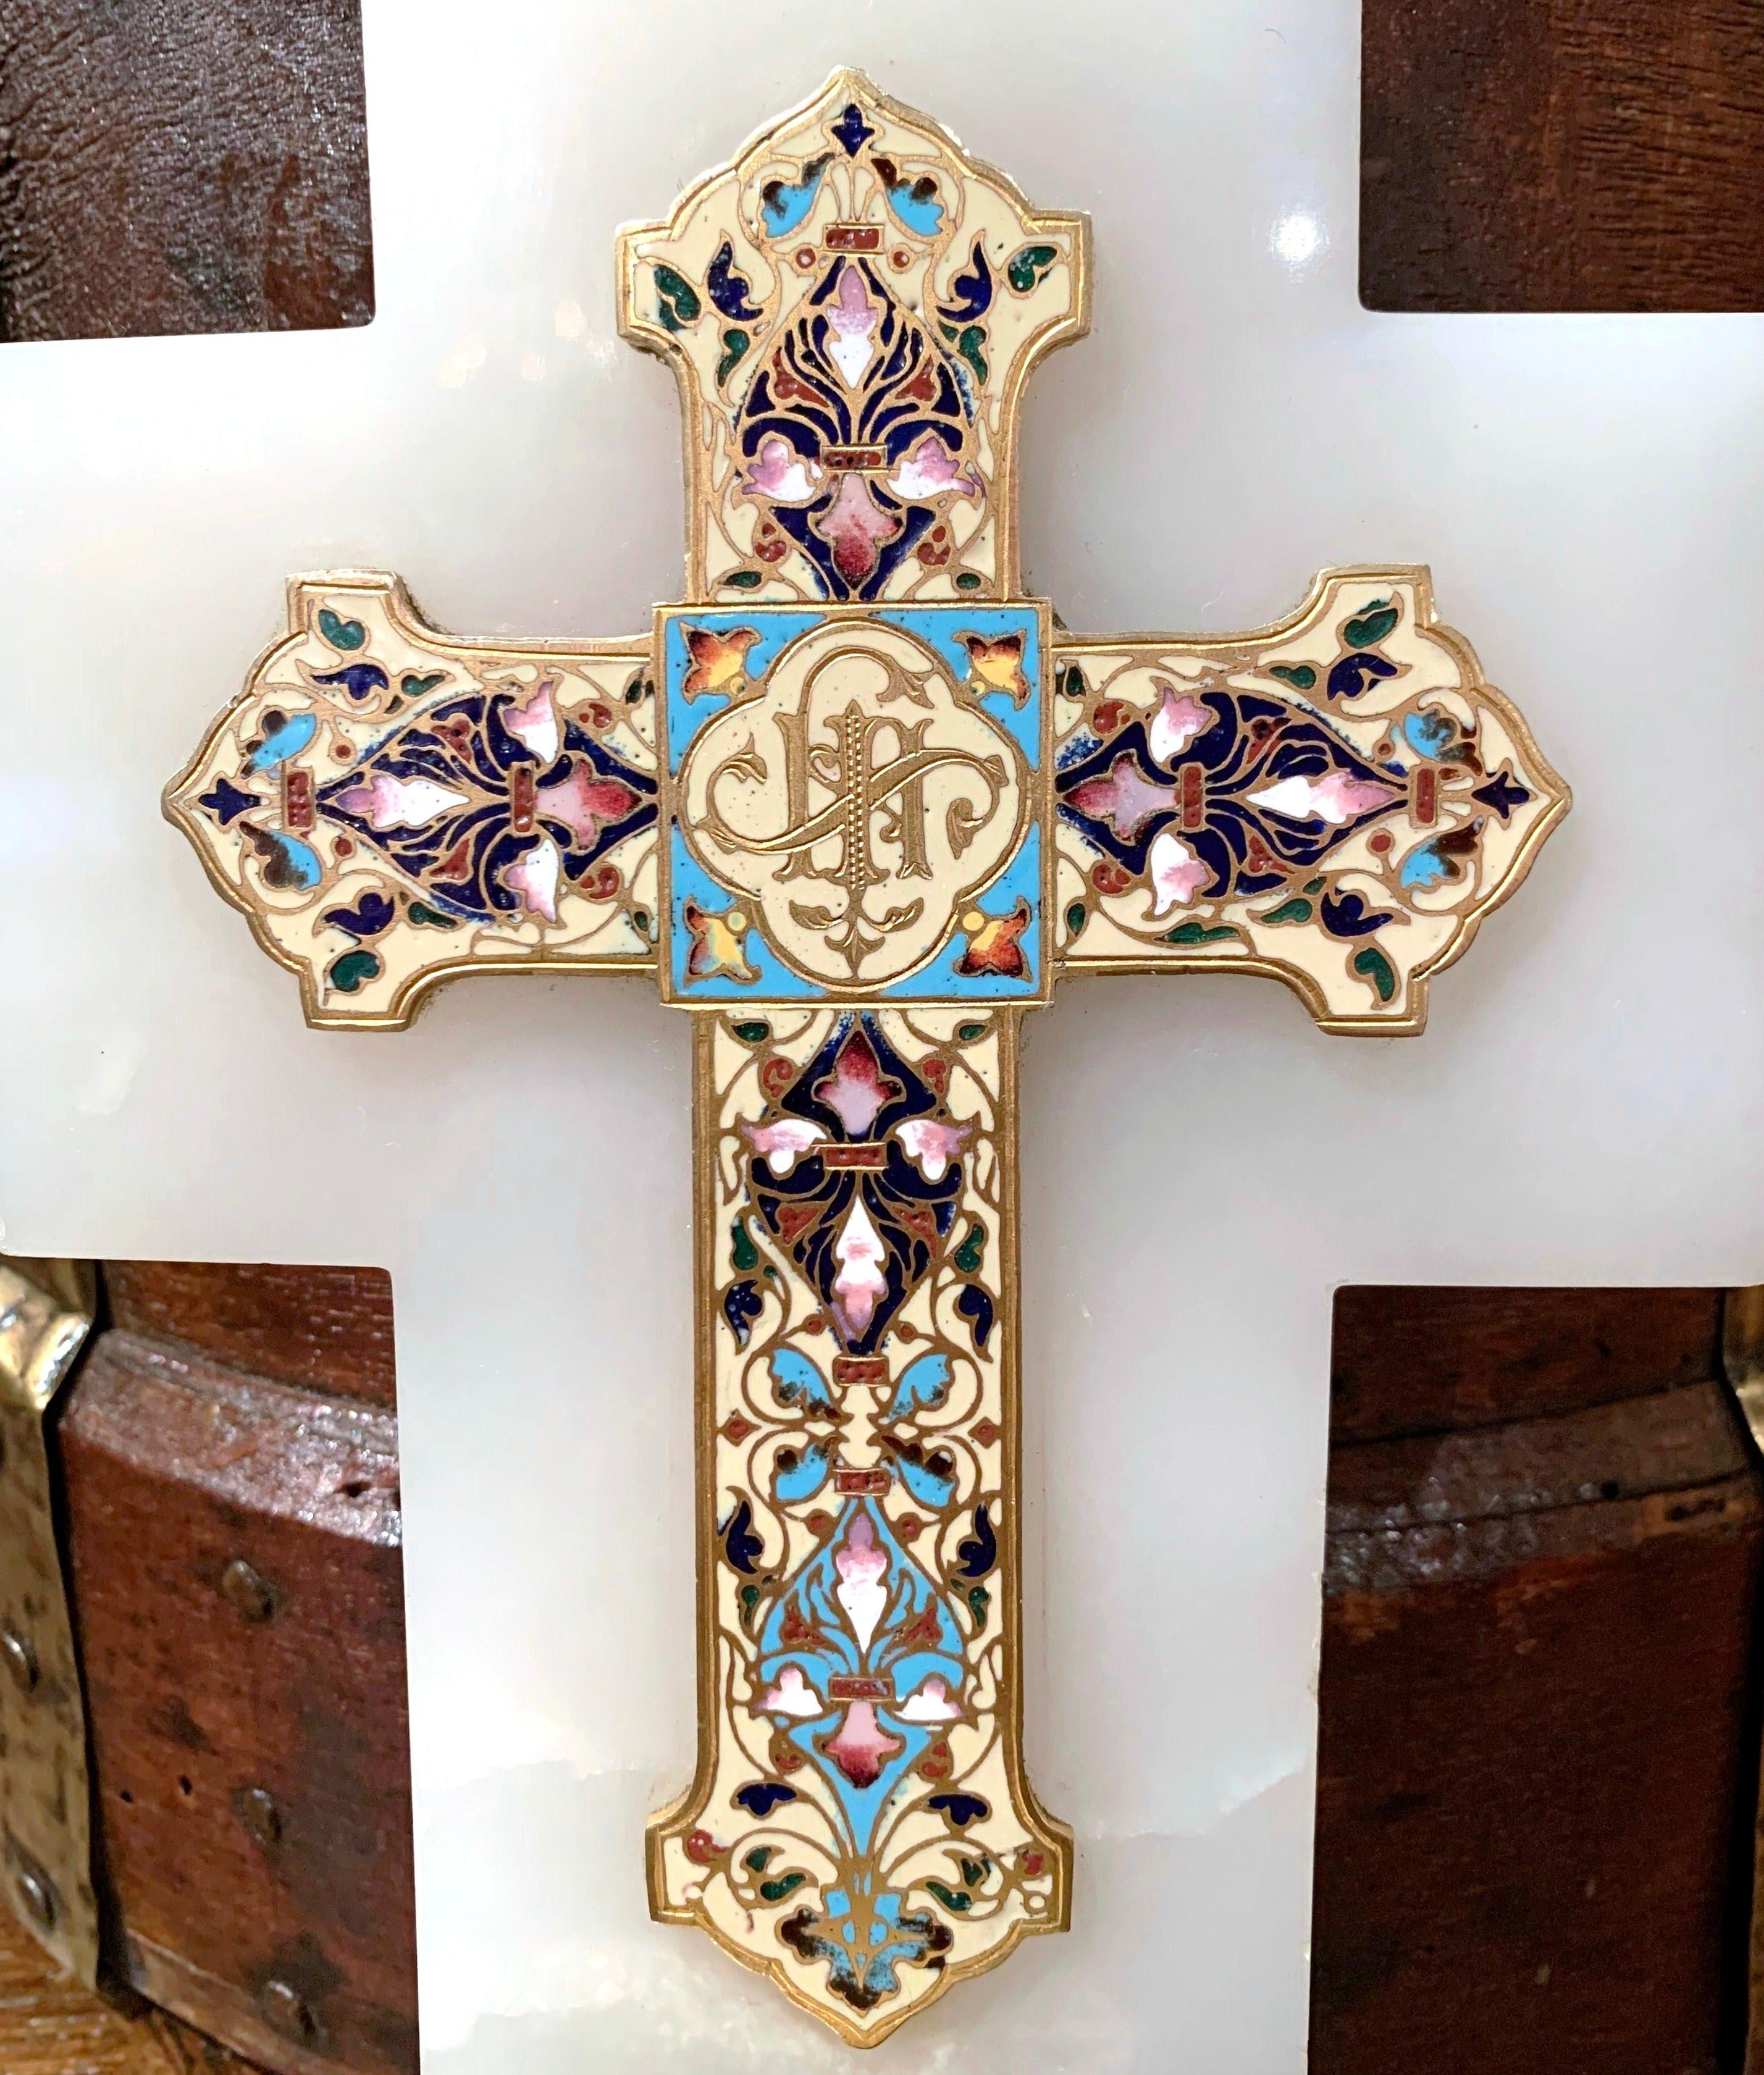 This colorful marble and brass cross with holy water recipient was created in France, circa 1880. The antique cross features beautiful, intricate cloisonné work with enamel, stone and bronze and is mount on a gleaming white marble plaque. Cloisonné